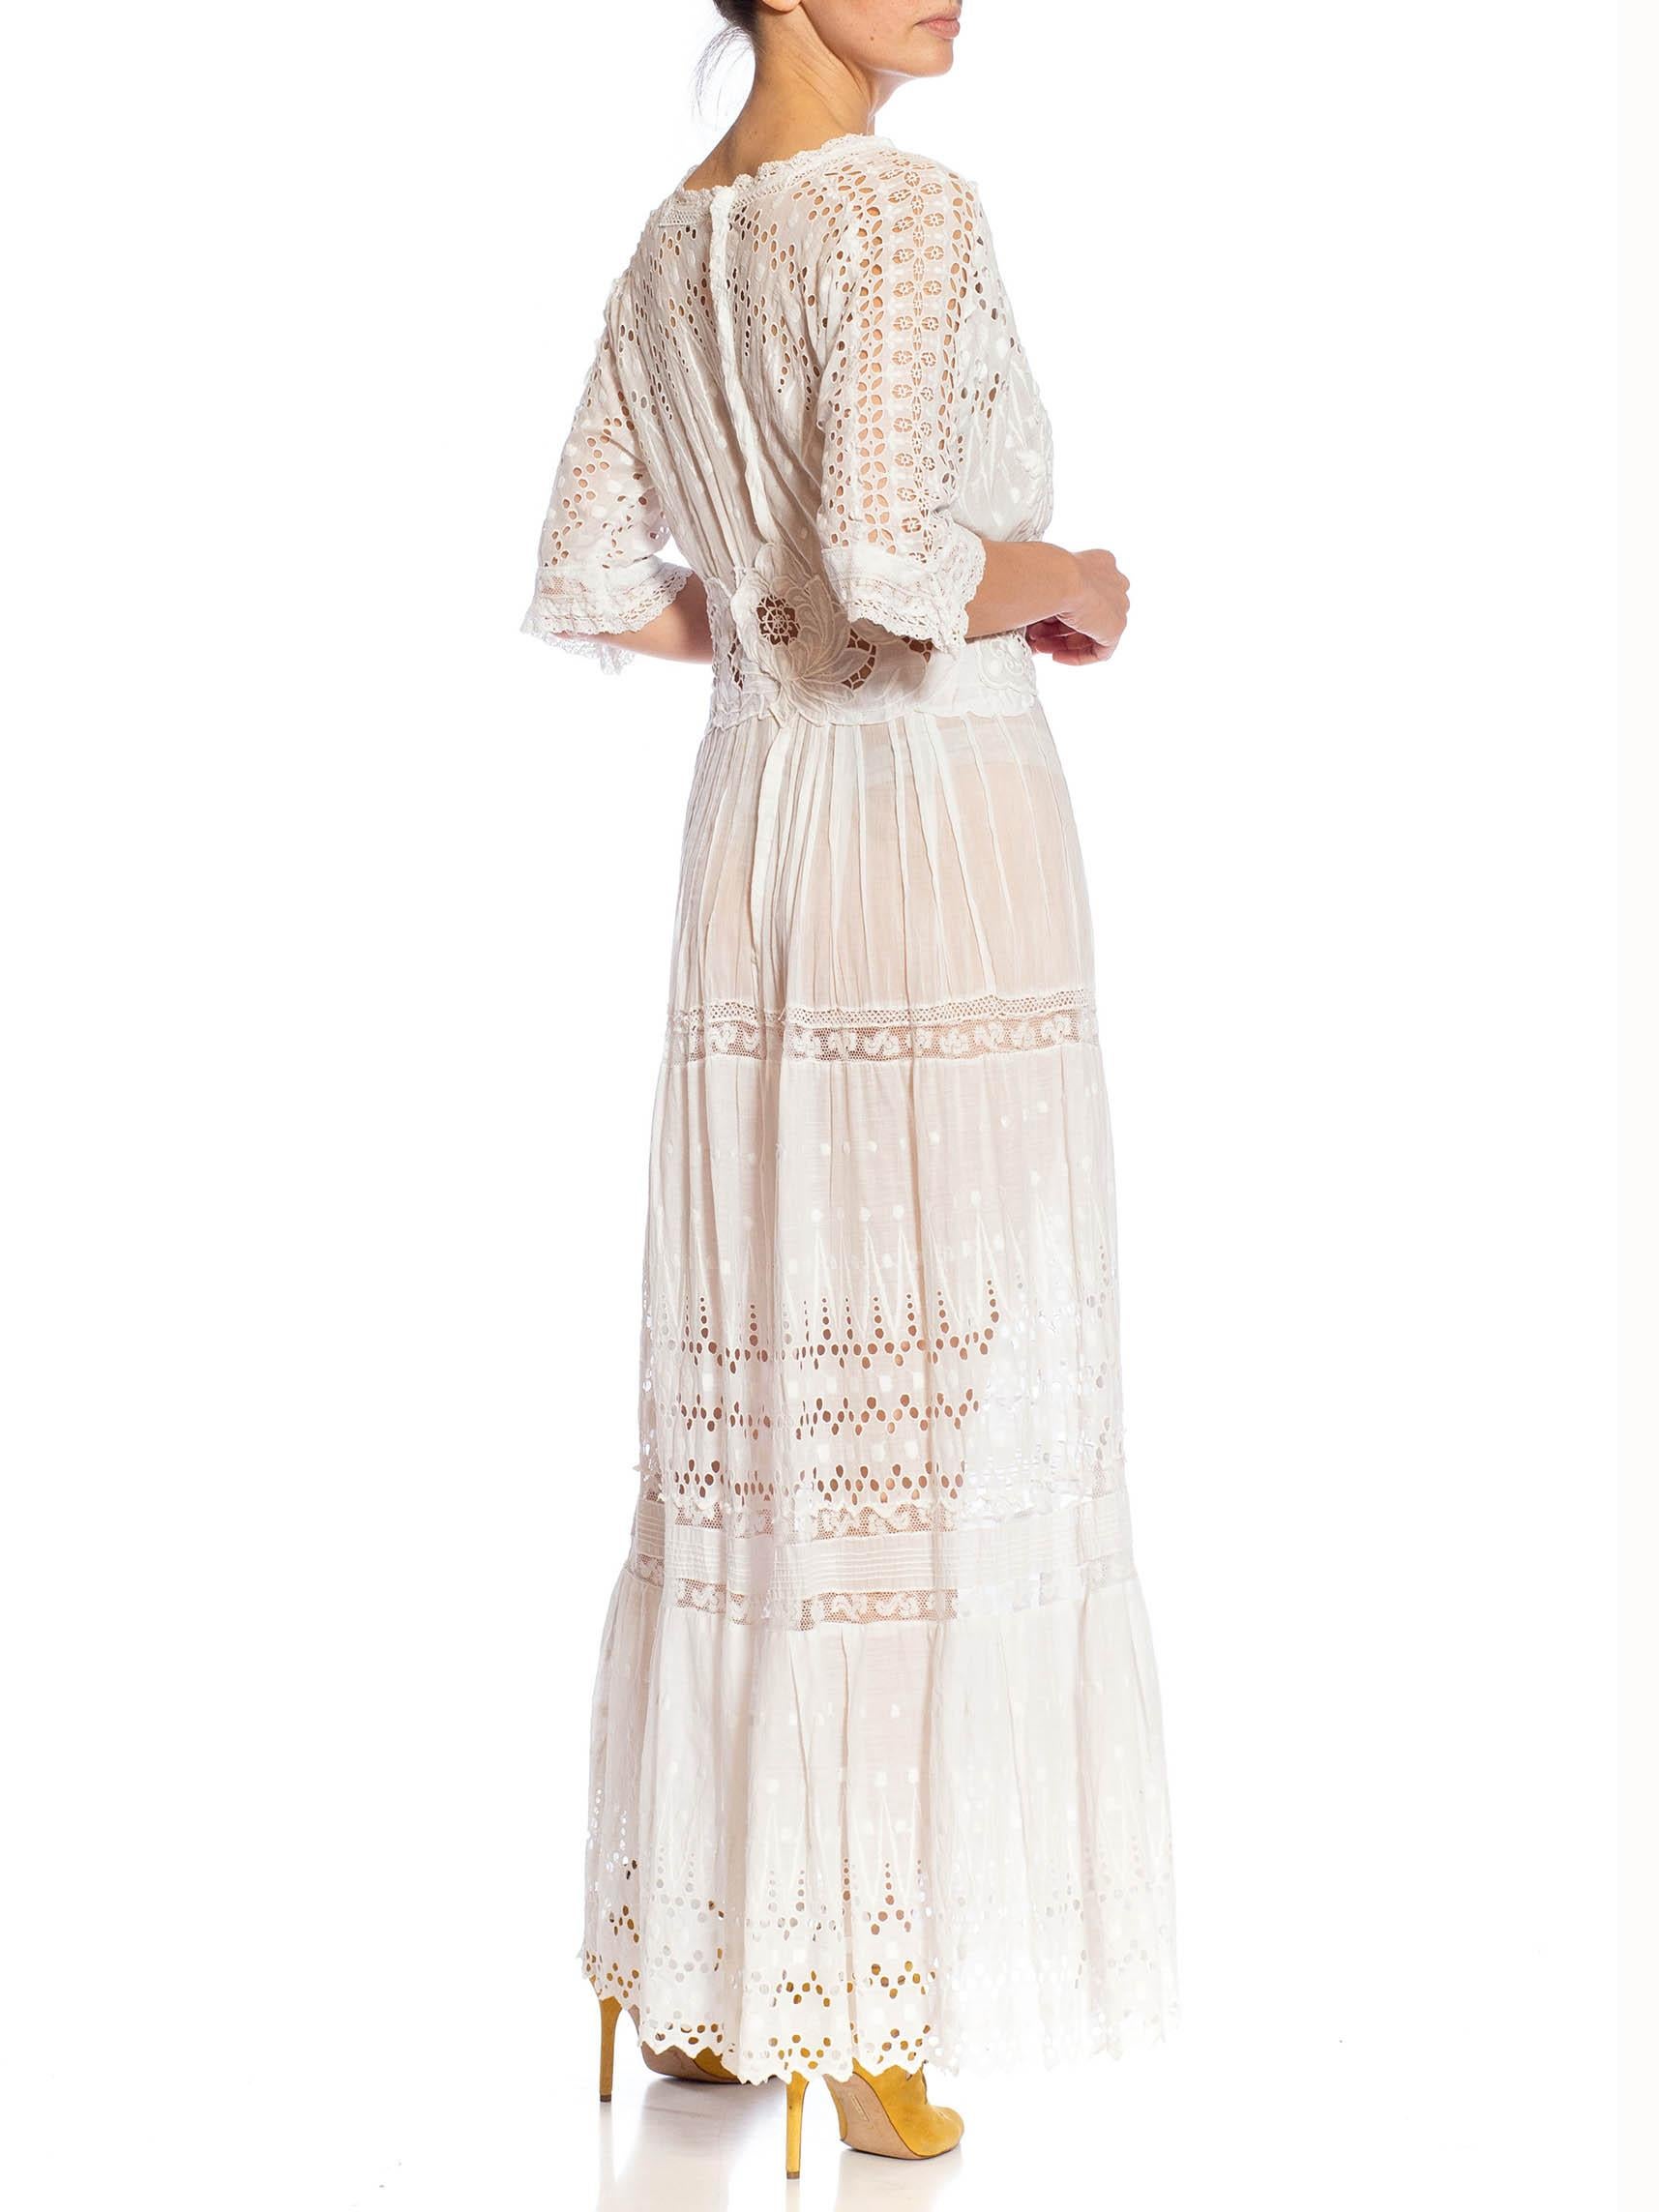 This dress is made from antique lace from the turn of the century. Pieced together and stitched by hand in our atelier. MORPHEW ATELIER White Organic Cotton Antique Lace Dress 